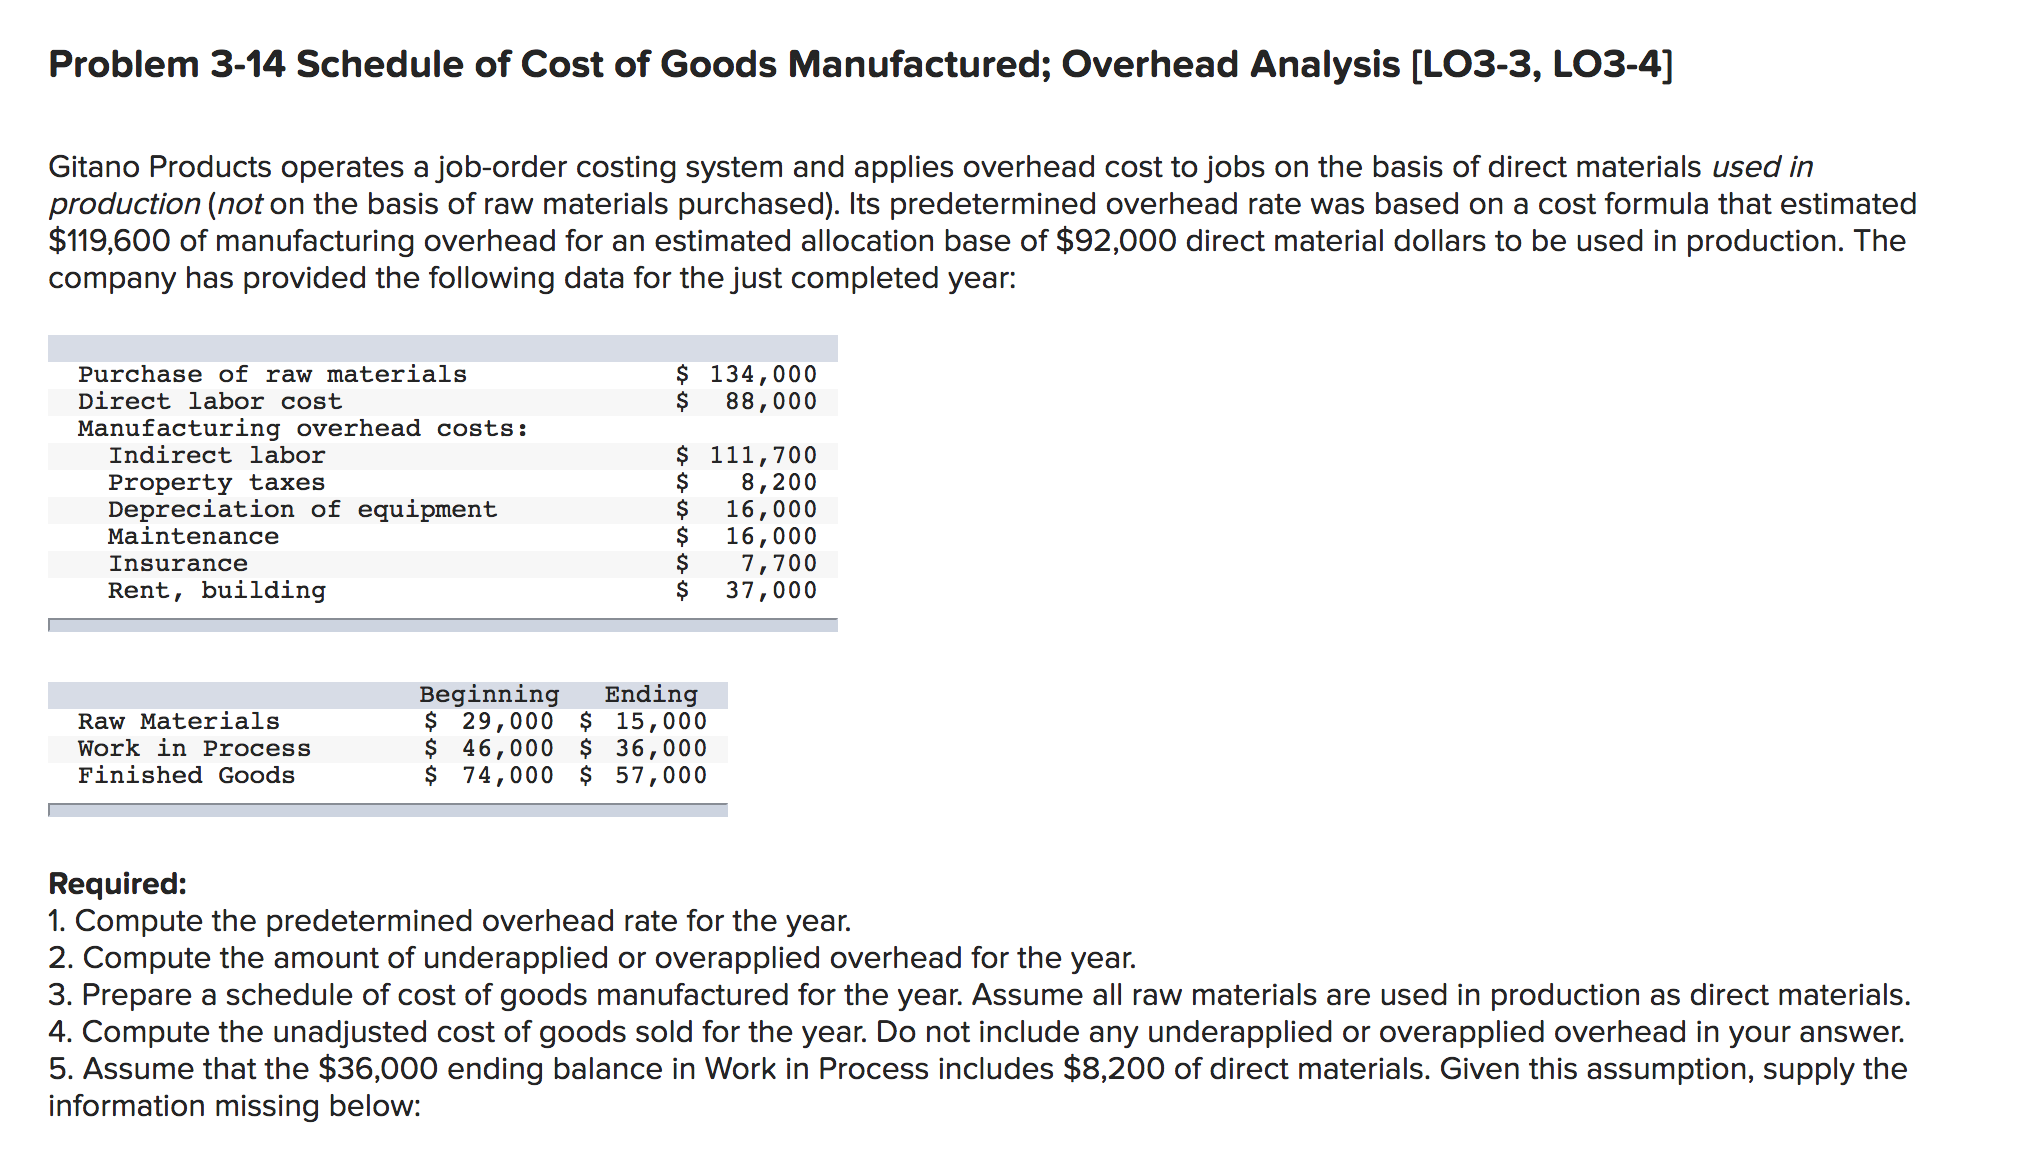 Problem 3-14 Schedule of Cost of Goods Manufactured; Overhead Analysis [LO3-3, LO3-4]
Gitano Products operates a job-order costing system and applies overhead cost to jobs on the basis of direct materials used in
production (not on the basis of raw materials purchased). Its predetermined overhead rate was based on a cost formula that estimated
$119,600 of manufacturing overhead for an estimated allocation base of $92,000 direct material dollars to be used in production. The
company has provided the following data for the just completed year:
$ 134,000
88,000
Purchase of raw materials
Direct labor cost
Manufacturing overhead costs:
Indirect labor
$ 111,700
8,200
16,000
16,000
7,700
37,000
Property taxes
Depreciation of equipment
Maintenance
Insurance
Rent, building
Beginning
$ 29,000 $ 15,000
$ 46,000 $ 36,000
$ 74,000 $ 57,000
Ending
Raw Materials
Work in Process
Finished Goods
Required:
1. Compute the predetermined overhead rate for the year.
2. Compute the amount of underapplied or overapplied overhead for the year.
3. Prepare a schedule of cost of goods manufactured for the year. Assume all raw materials are used in production as direct materials.
4. Compute the unadjusted cost of goods sold for the year. Do not include any underapplied or overapplied overhead in your answer.
5. Assume that the $36,000 ending balance in Work in Process includes $8,200 of direct materials. Given this assumption, supply the
information missing below:
